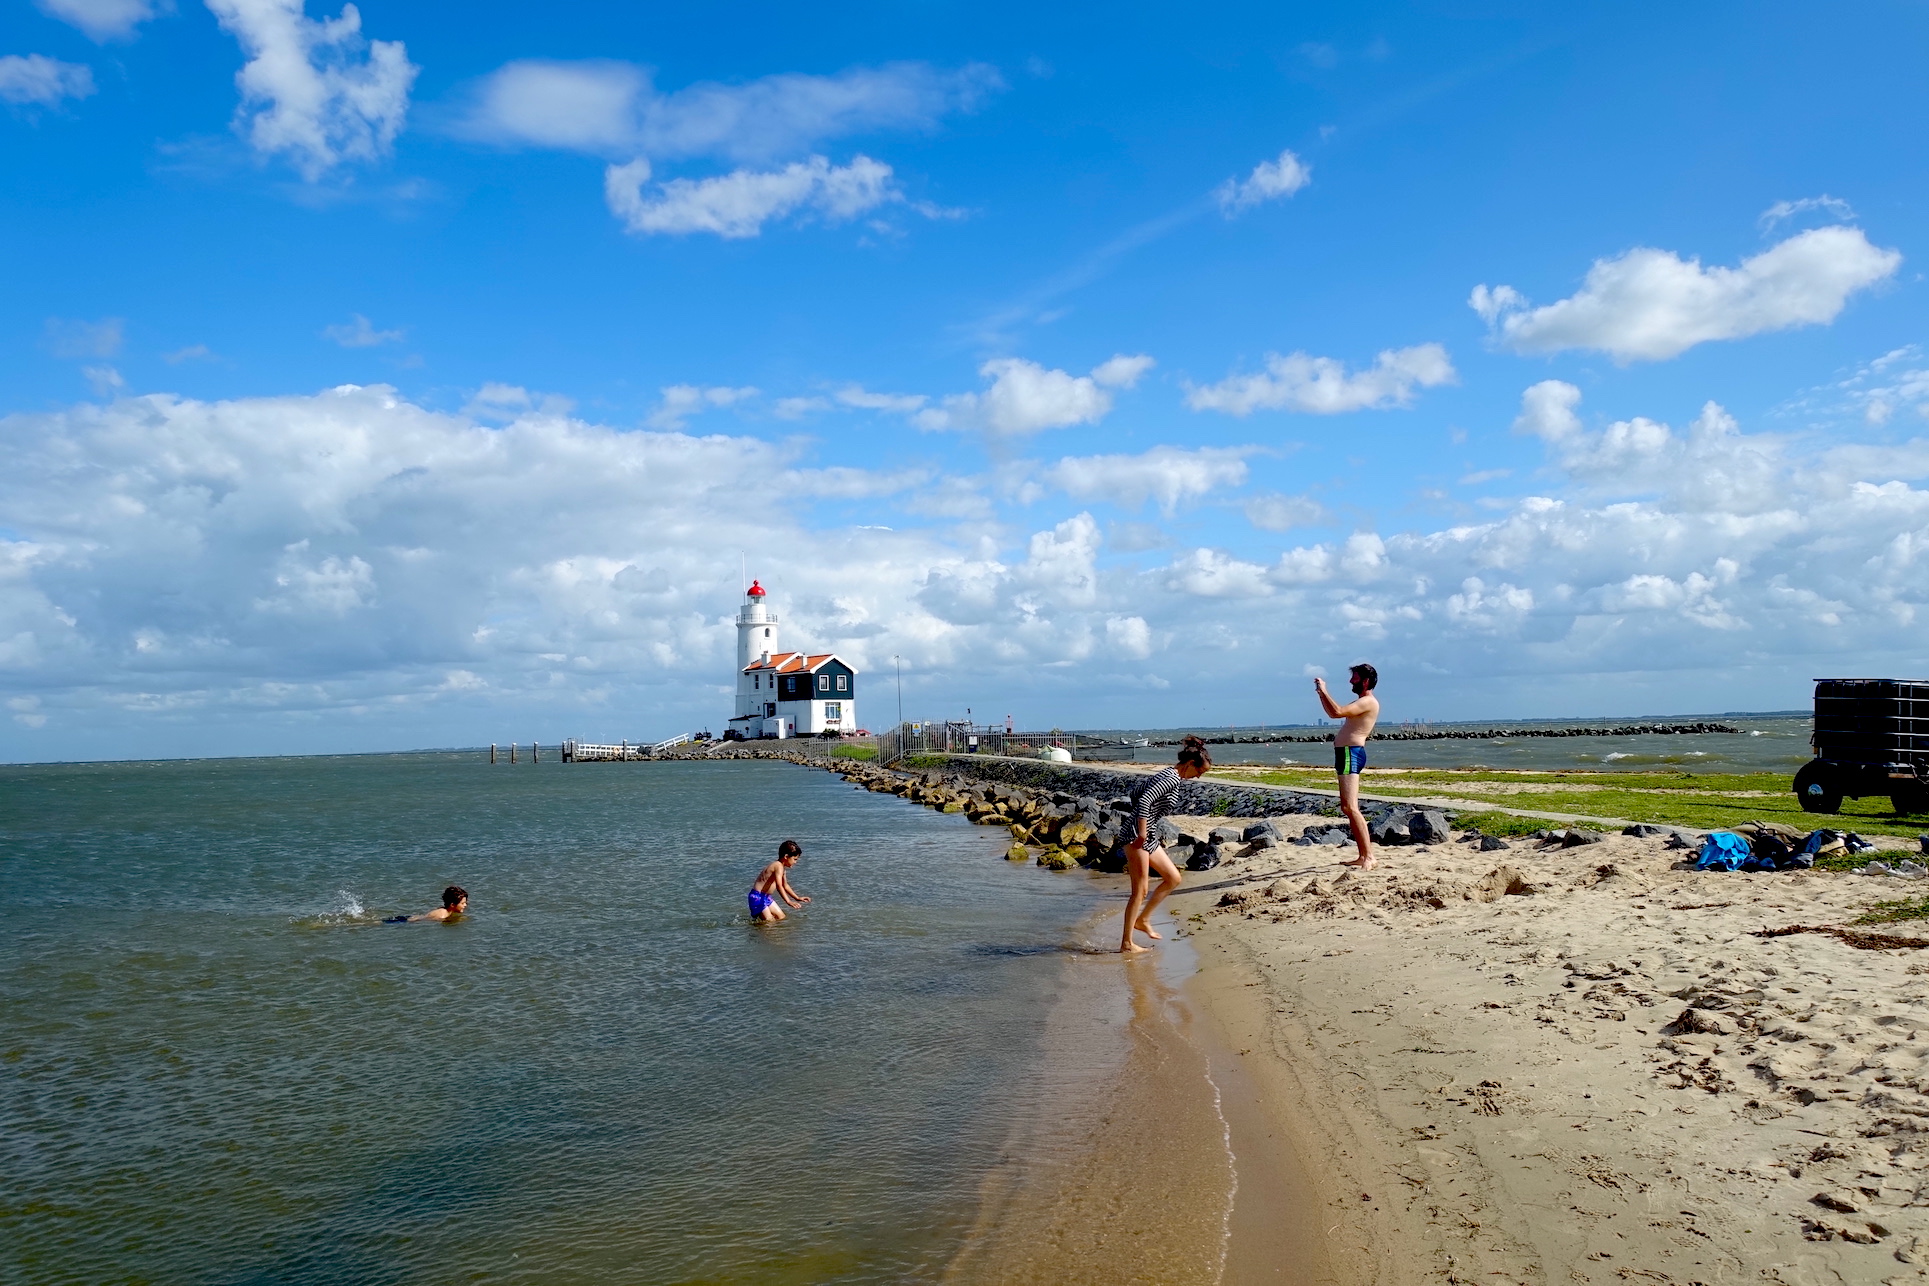 Some swimmers on the Marken beach near Amsterdam and the lighthouse